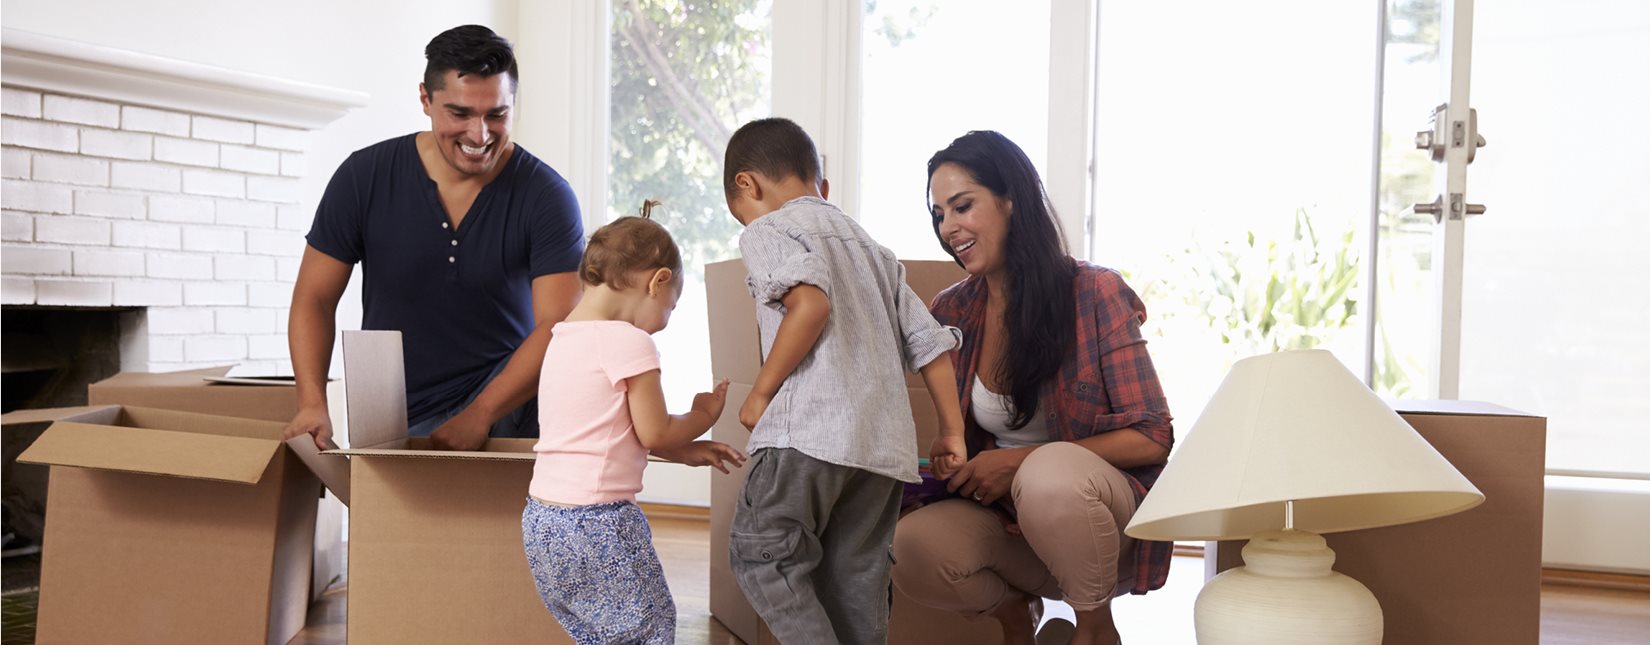 young family playing with empty boxes